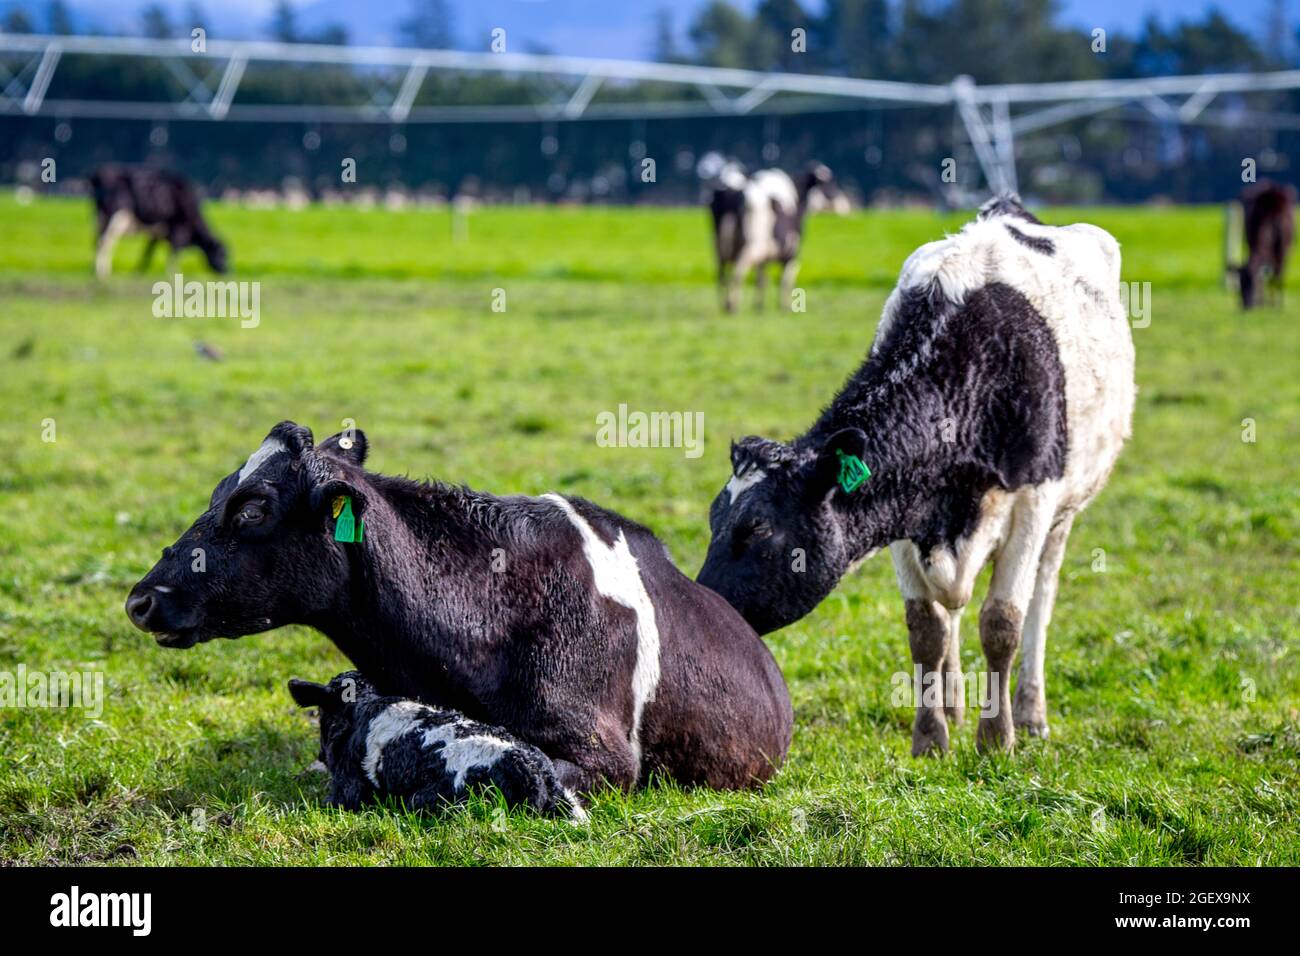 A mother friesian cow rests and protects her newborn calf in a field of pregnant dairy cows, Canterbury, New Zealand Stock Photo